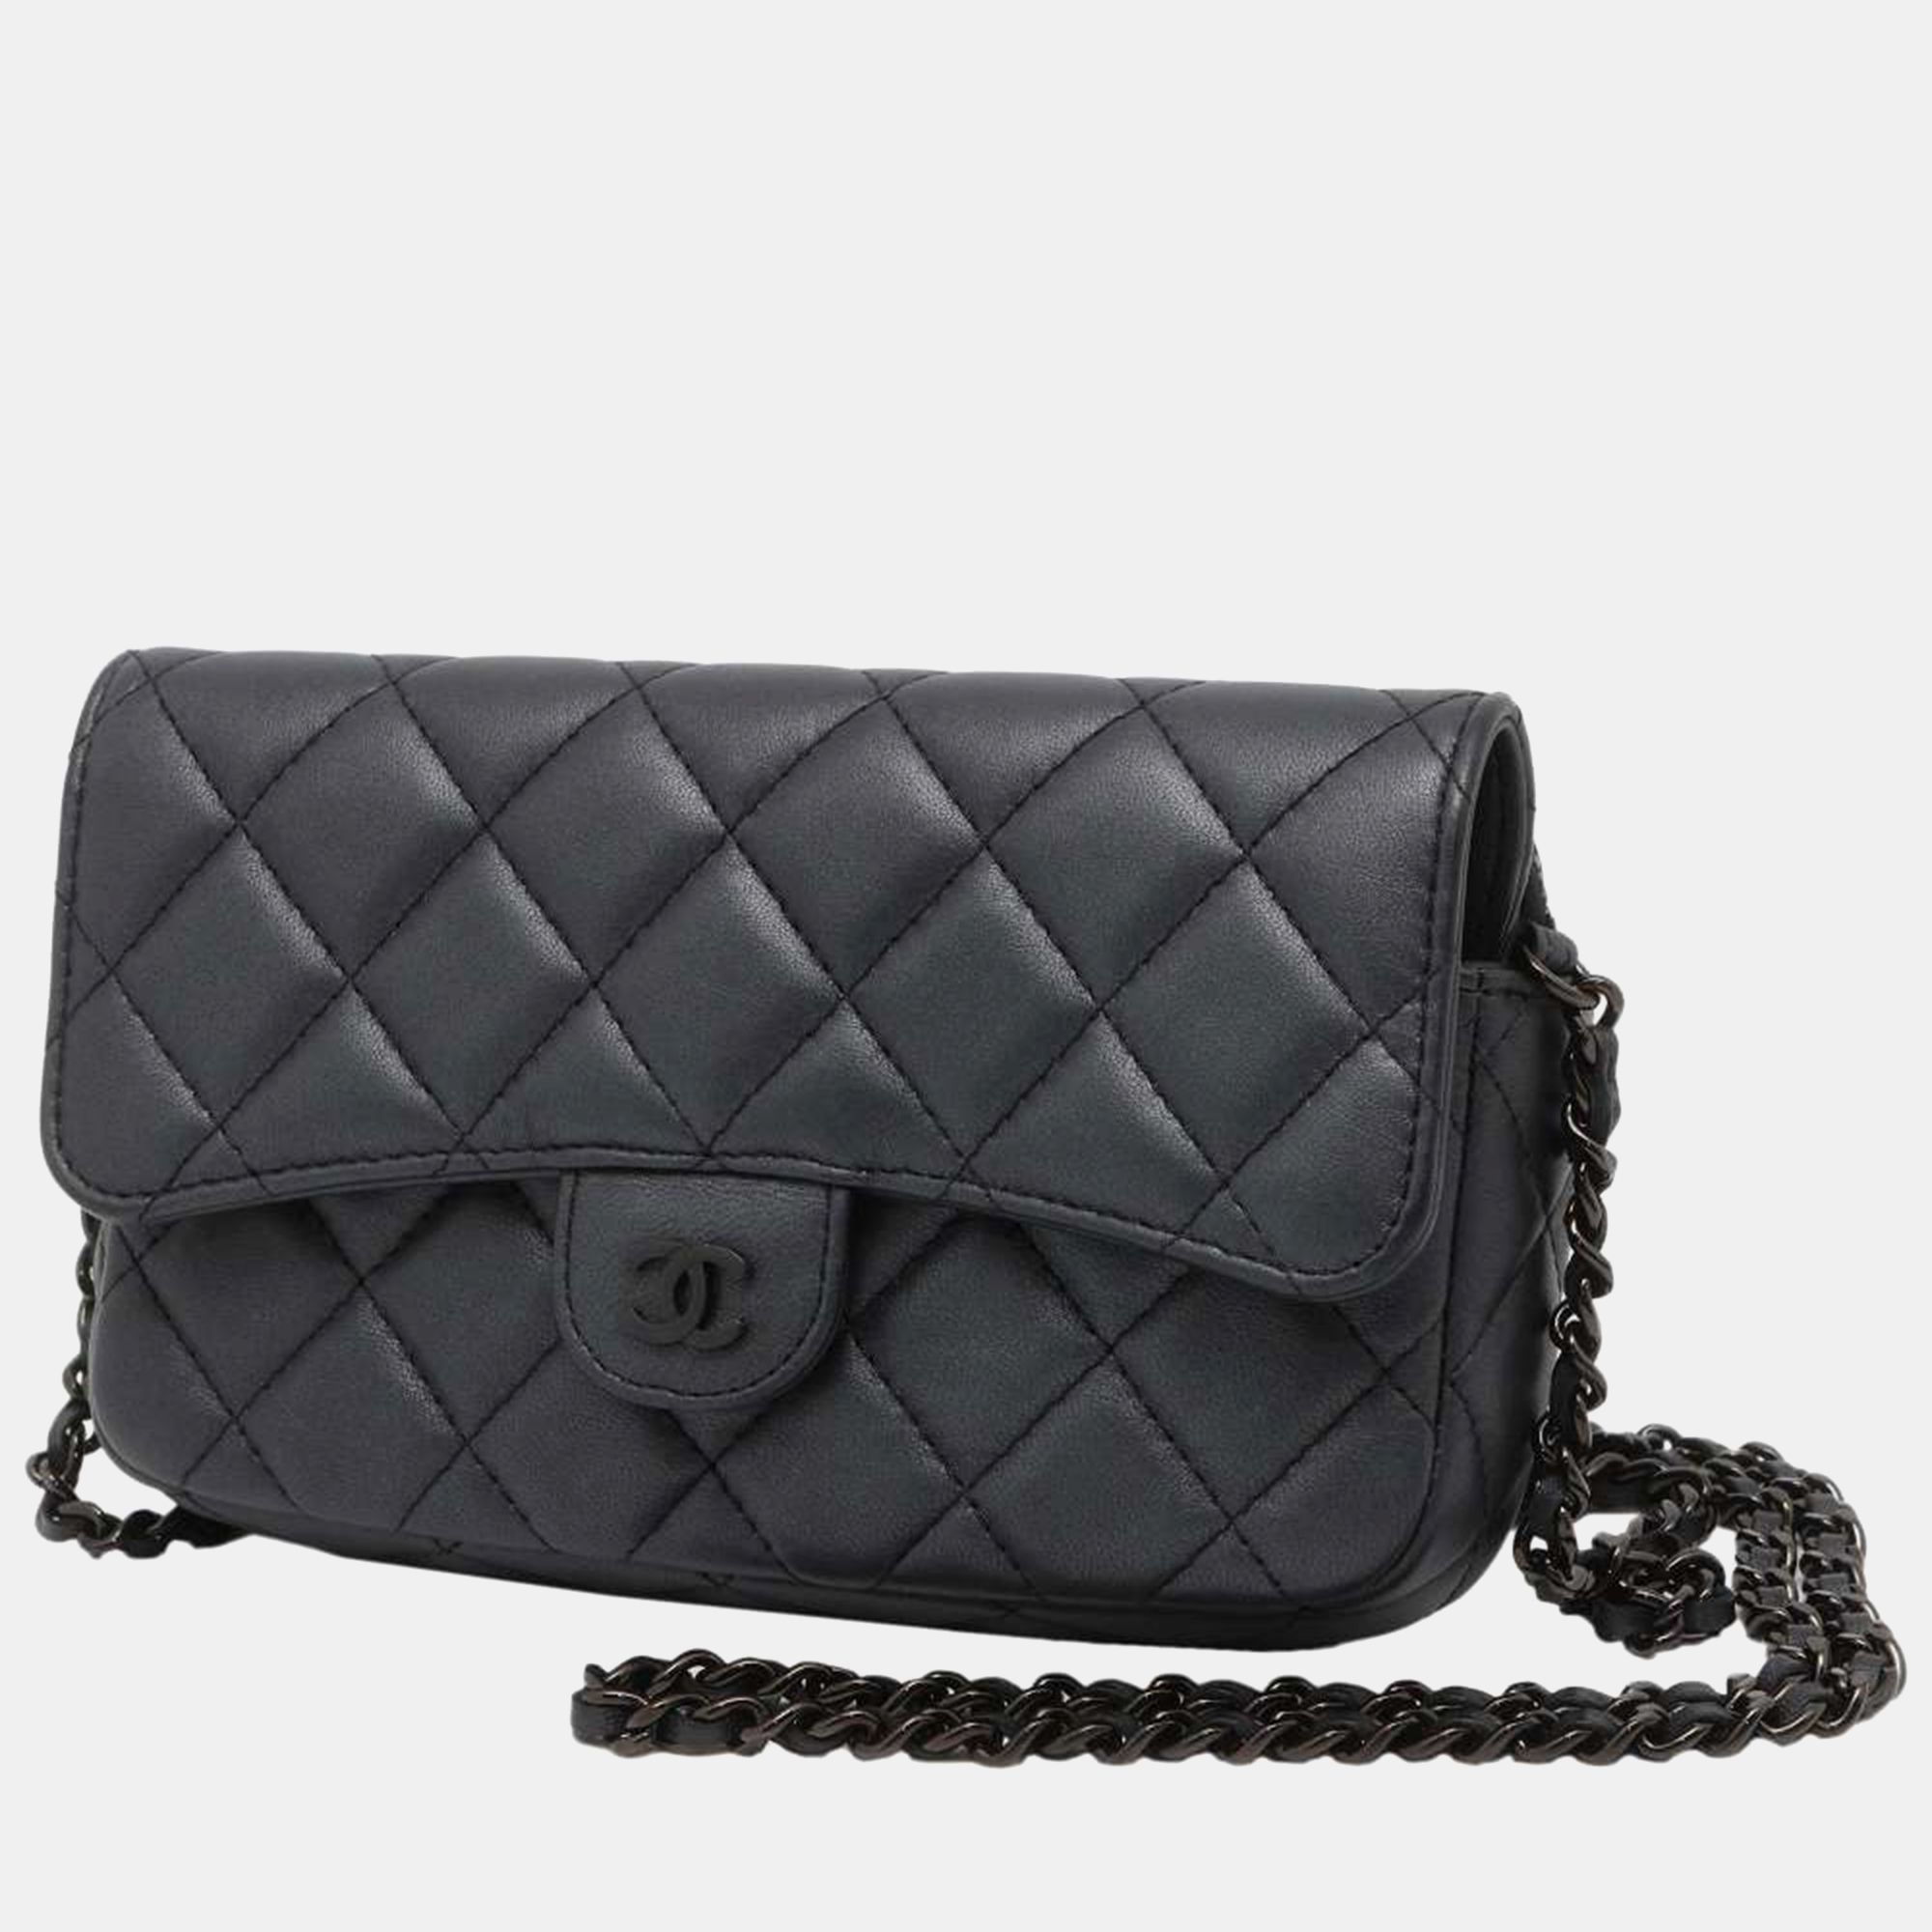 Chanel black leather classic flap phone holder w/chain